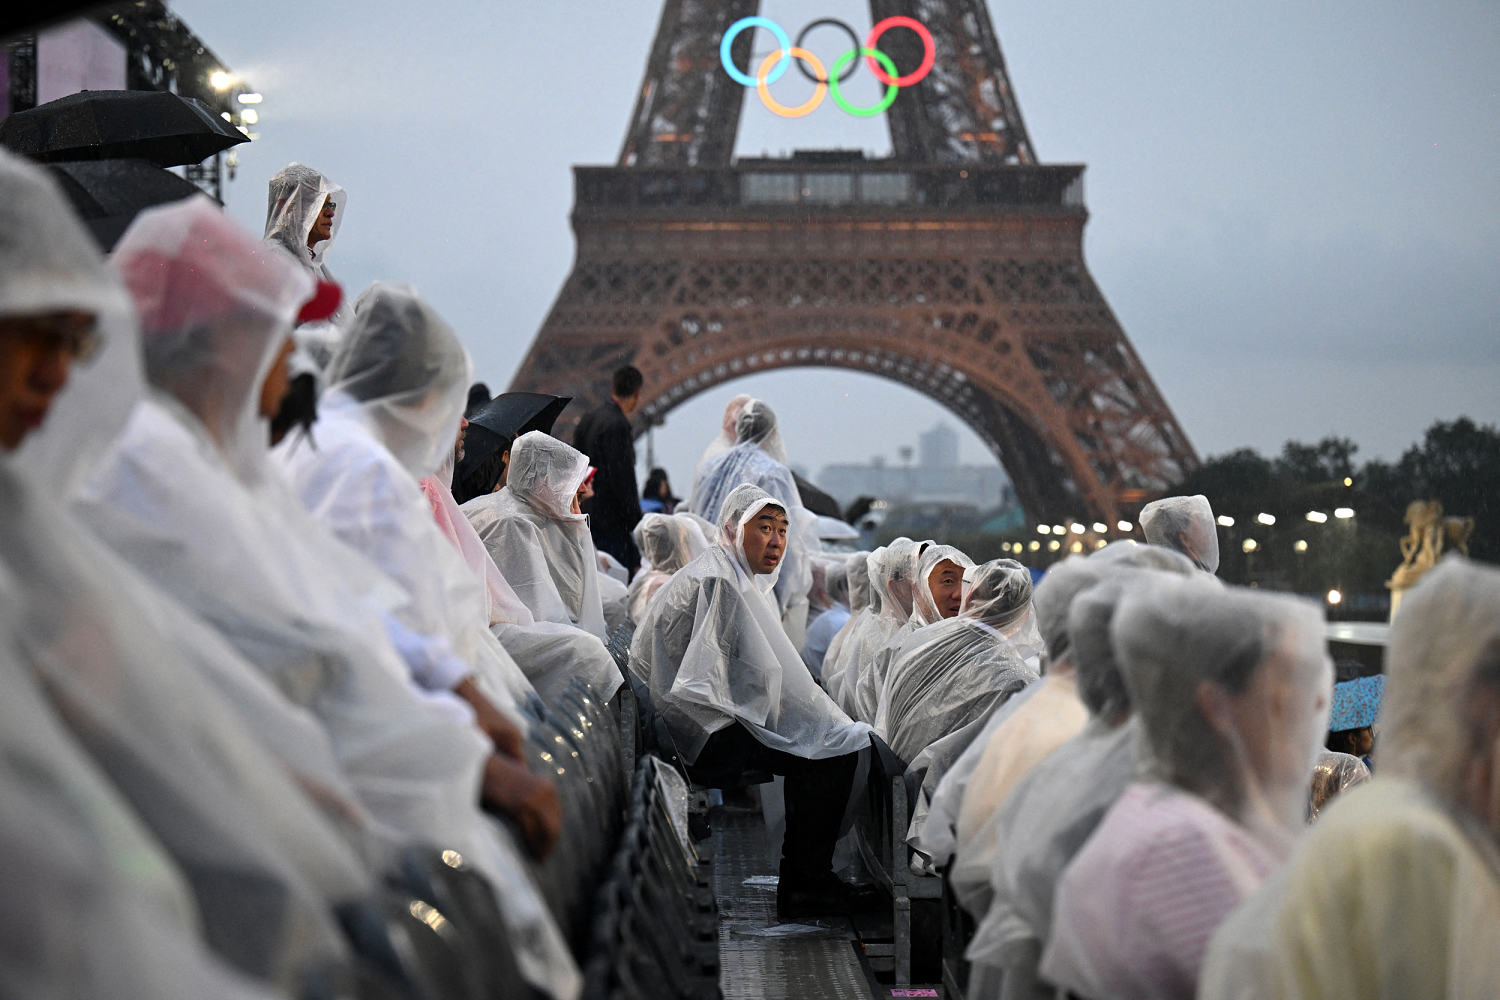 Americans left stunned—and sober—by dry Paris Olympics events